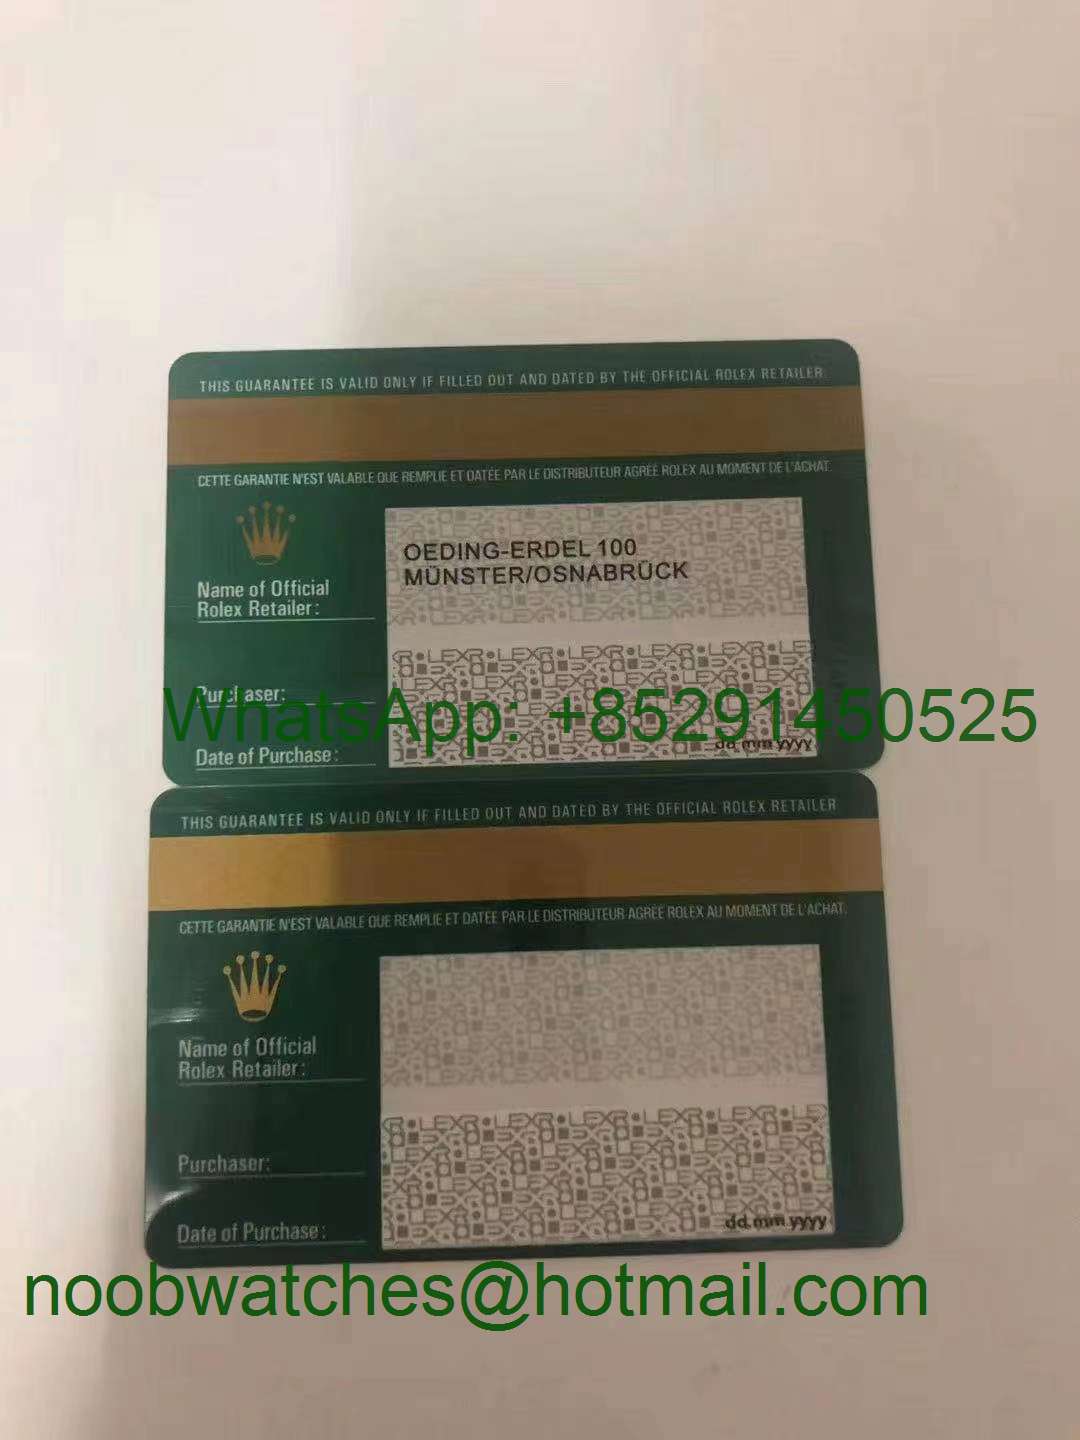 Custom Made Rolex Warranty Card with Anti-Forgery Crown and Fluorescent Matching Print